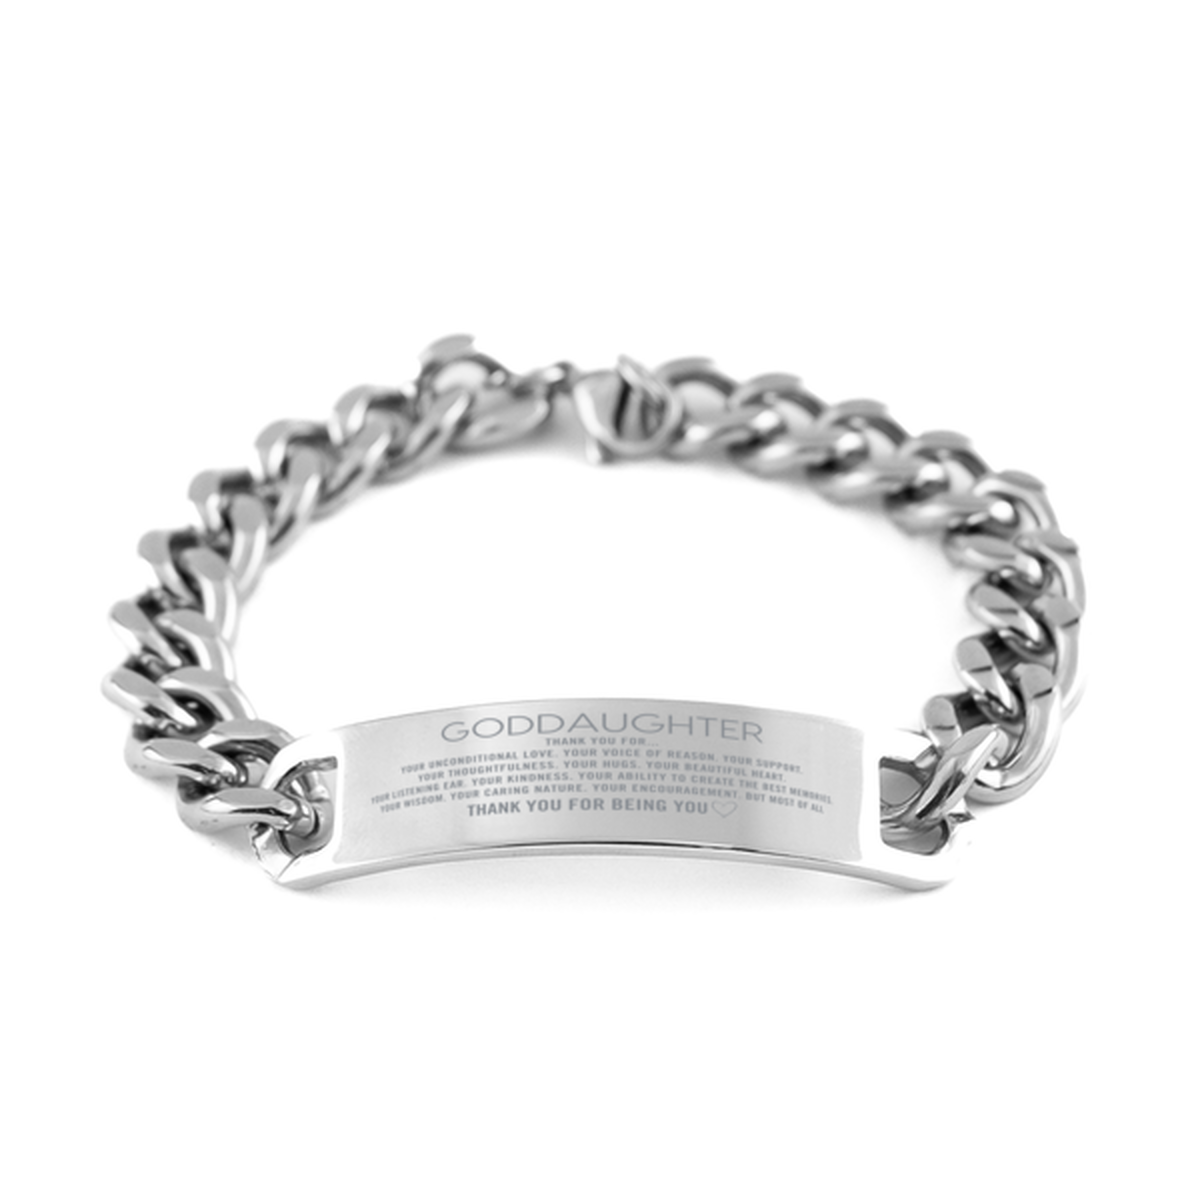 Goddaughter Cuban Chain Stainless Steel Bracelet Custom, Engraved Gifts For Goddaughter Christmas Graduation Birthday Gifts for Men Women Goddaughter Thank you for Your unconditional love